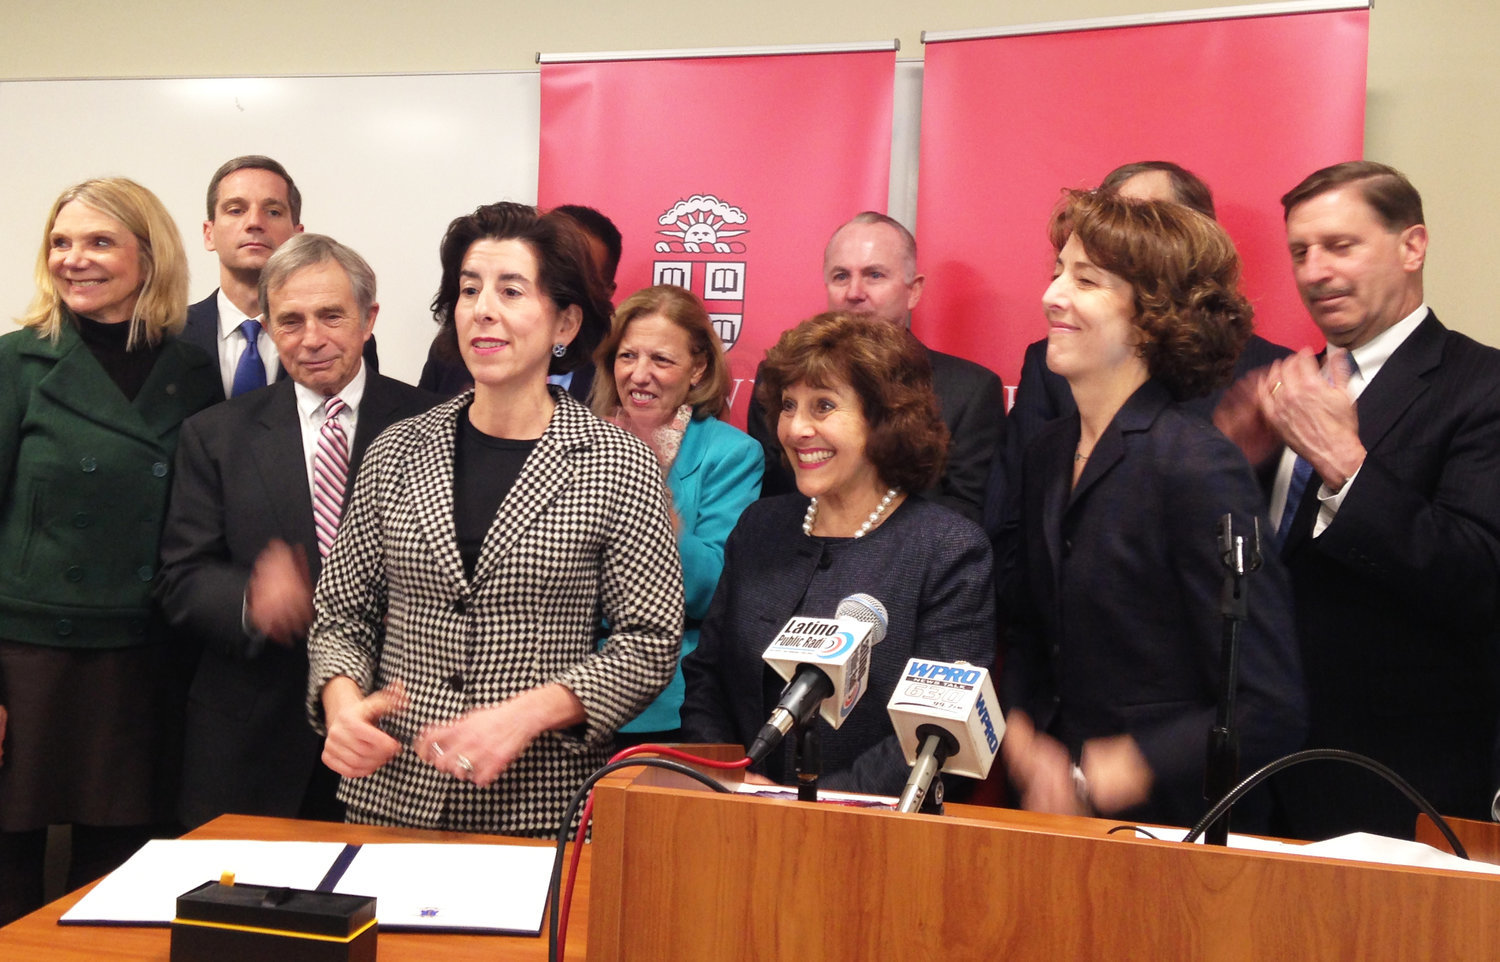 On Feb. 6, 2019, Gov. Gina Raimondo signed an executive order that placed a voluntary cap of 3.2 percent annual growth for the health care spend in the state, accompanied by Dr. Tim Babineau, president and CEO of Lifespan, Dr. James Fanale, president and CEO of Care New England, Kim Keck, president and CEO of Blue Cross & Blue Shield of RI, Marie Ganim, the R.I. Health Insurance Commissioner, and Neil Steinberg, president and CEO of the Rhode Island Foundation, among others. With the proposed merger of Care New England and Lifespan, the question is: what regulatory mechanism or body will be able to enforce a spending cap on health care costs moving forward?